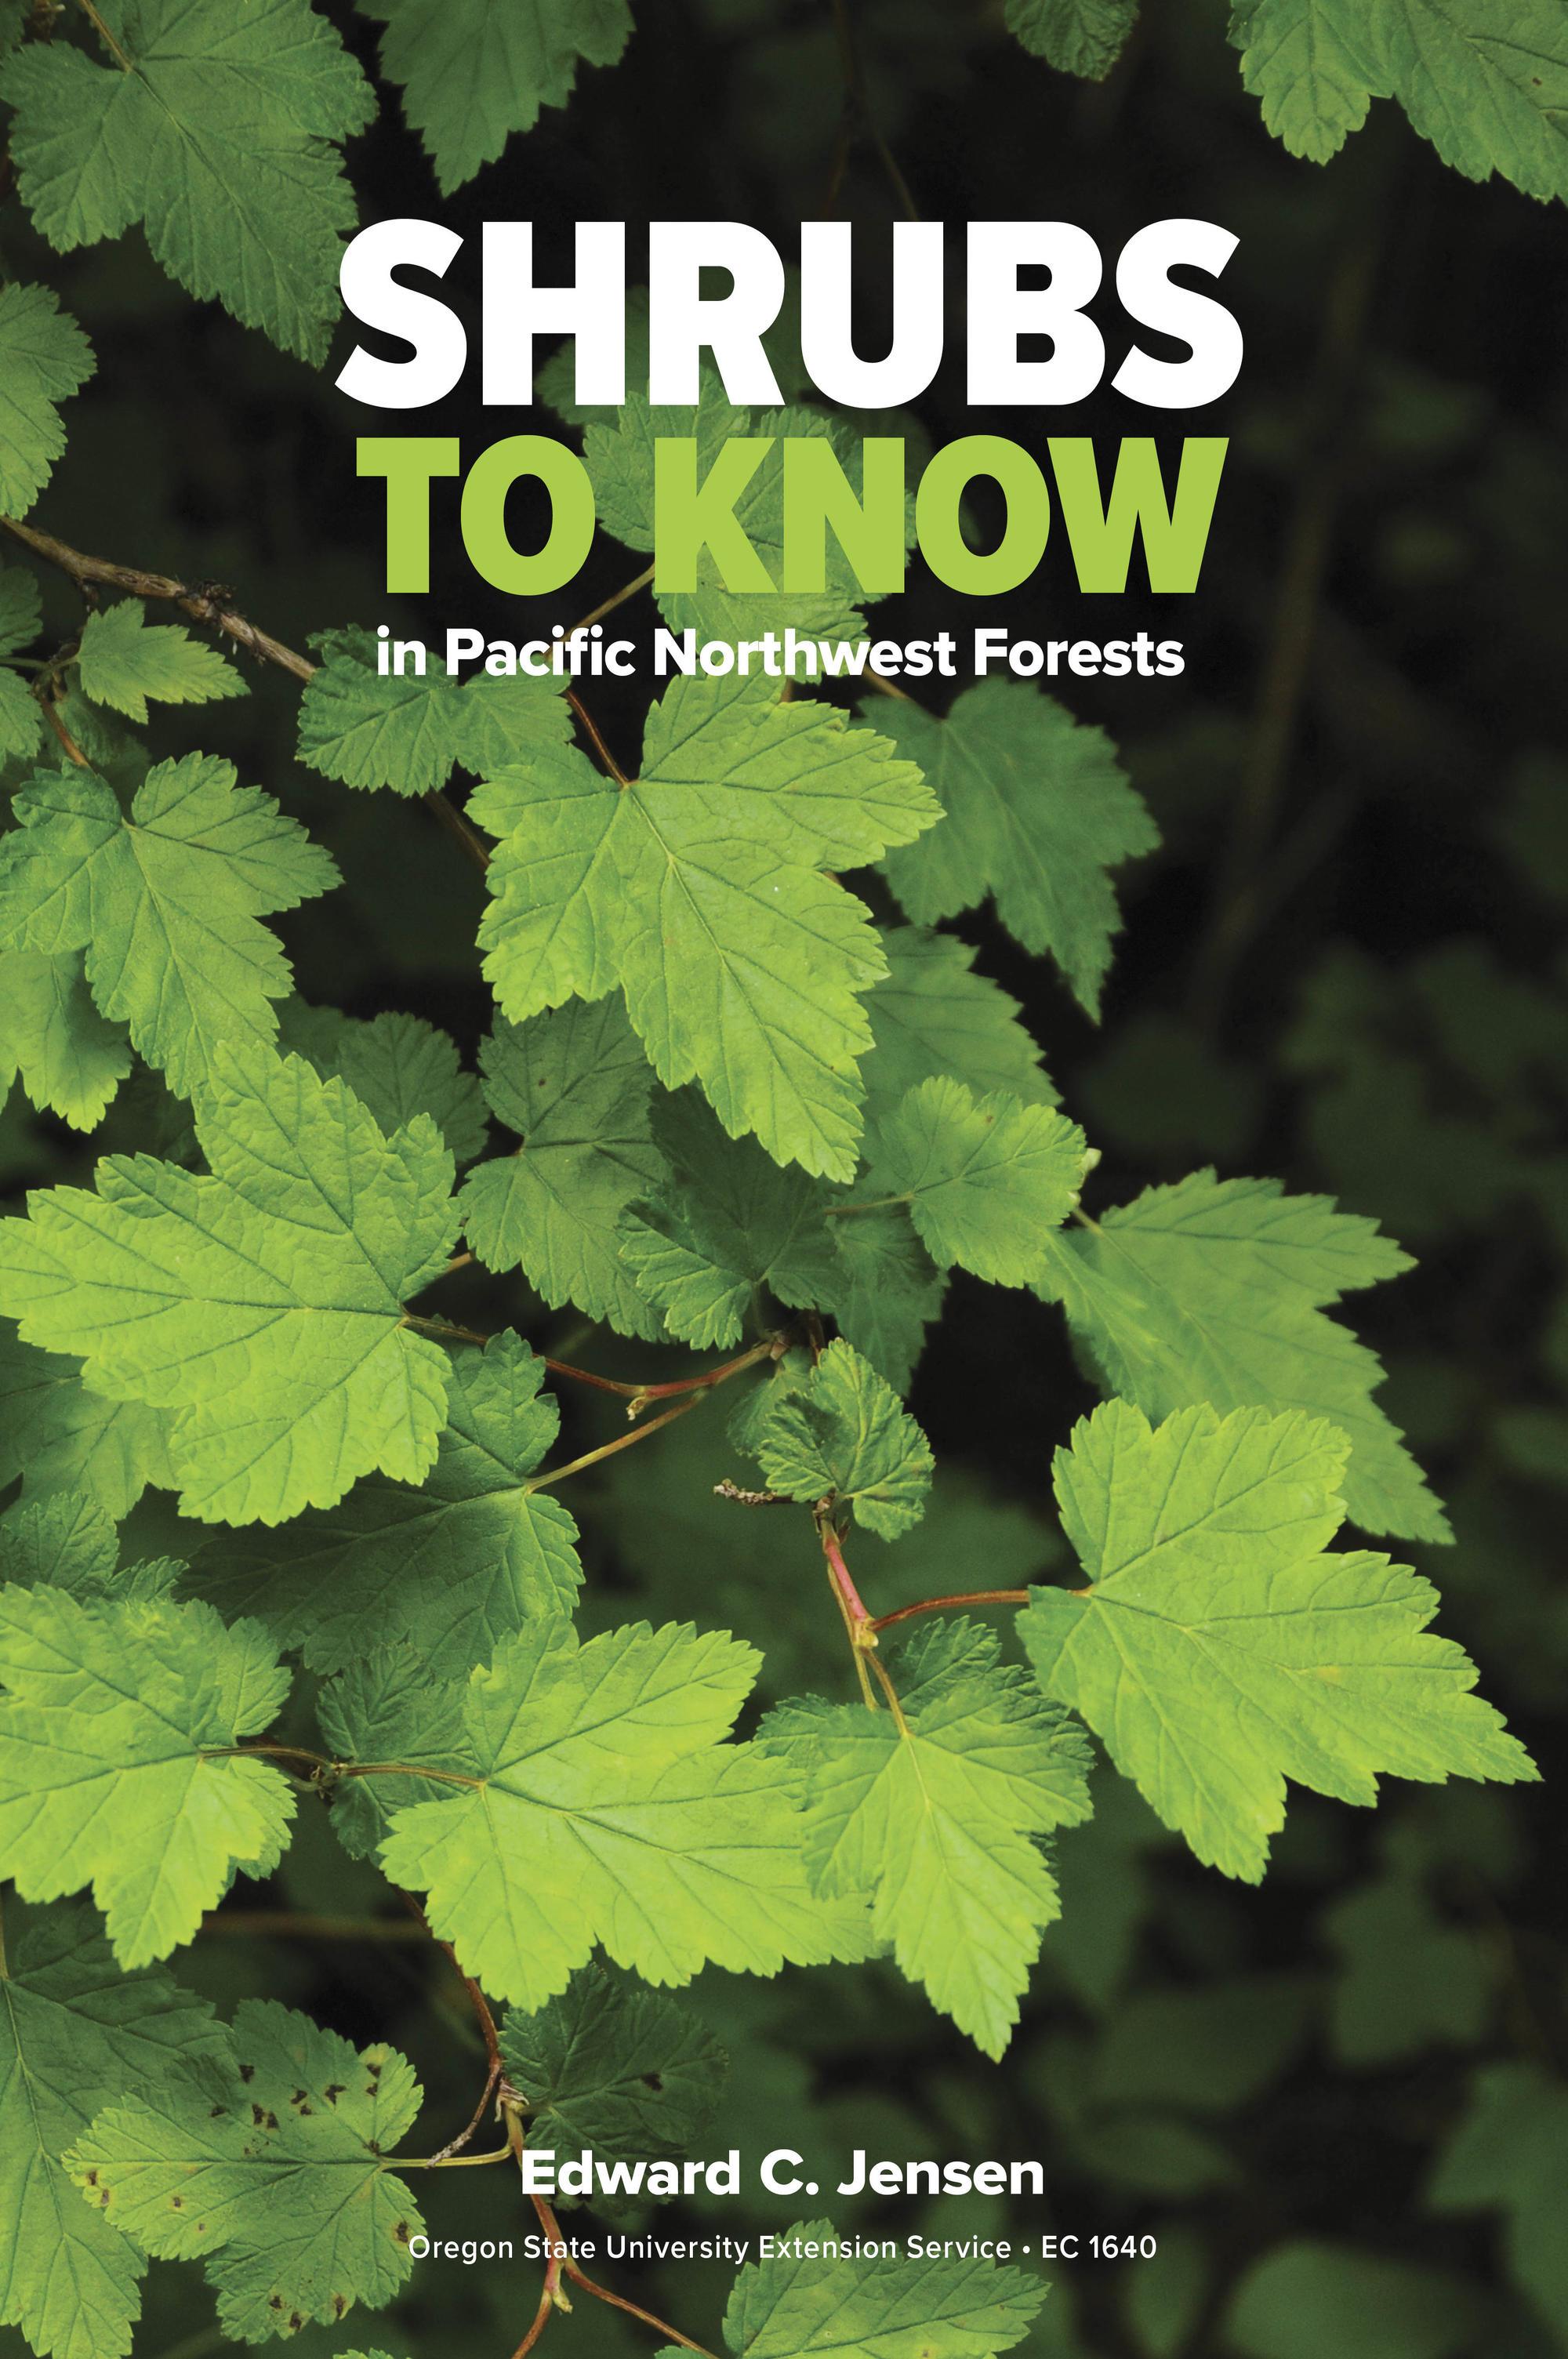 Cover of Shrubs to Know in Pacific Northwest Forests by Edward C. Jensen